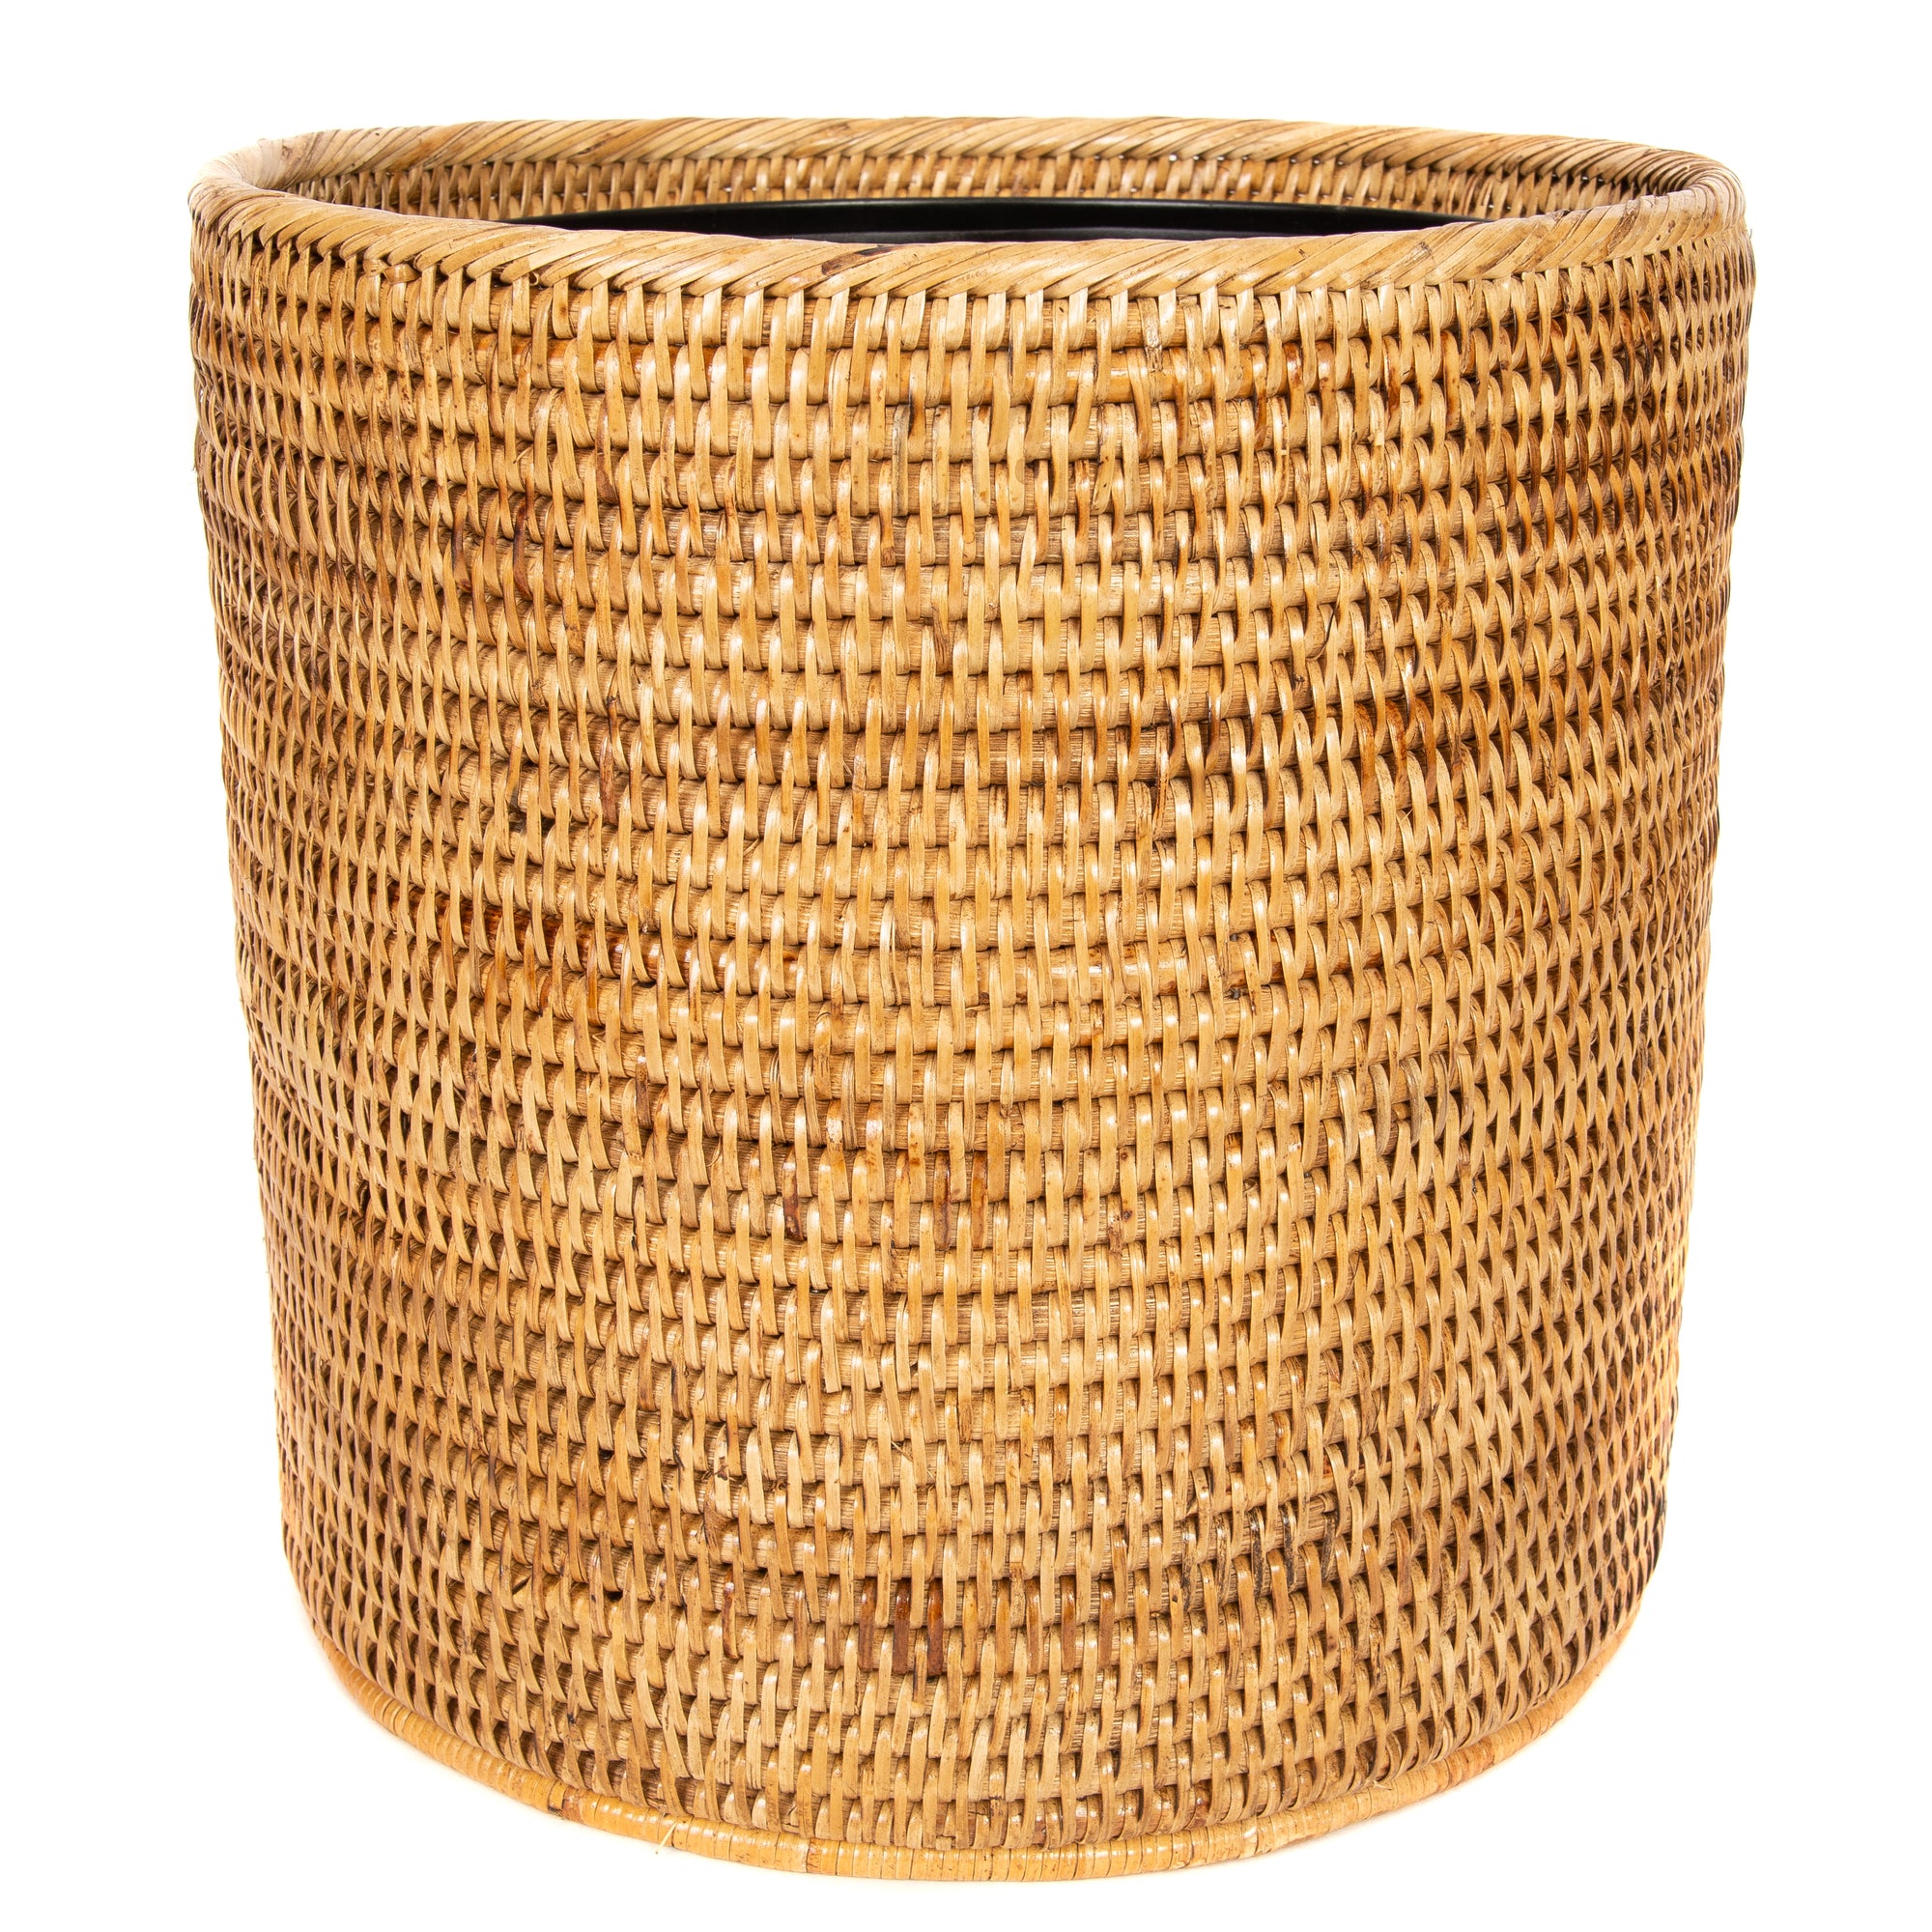 Artifacts Trading Company Rattan Rectangular Tapered Waste Basket with Metal Liner - Tudor Black